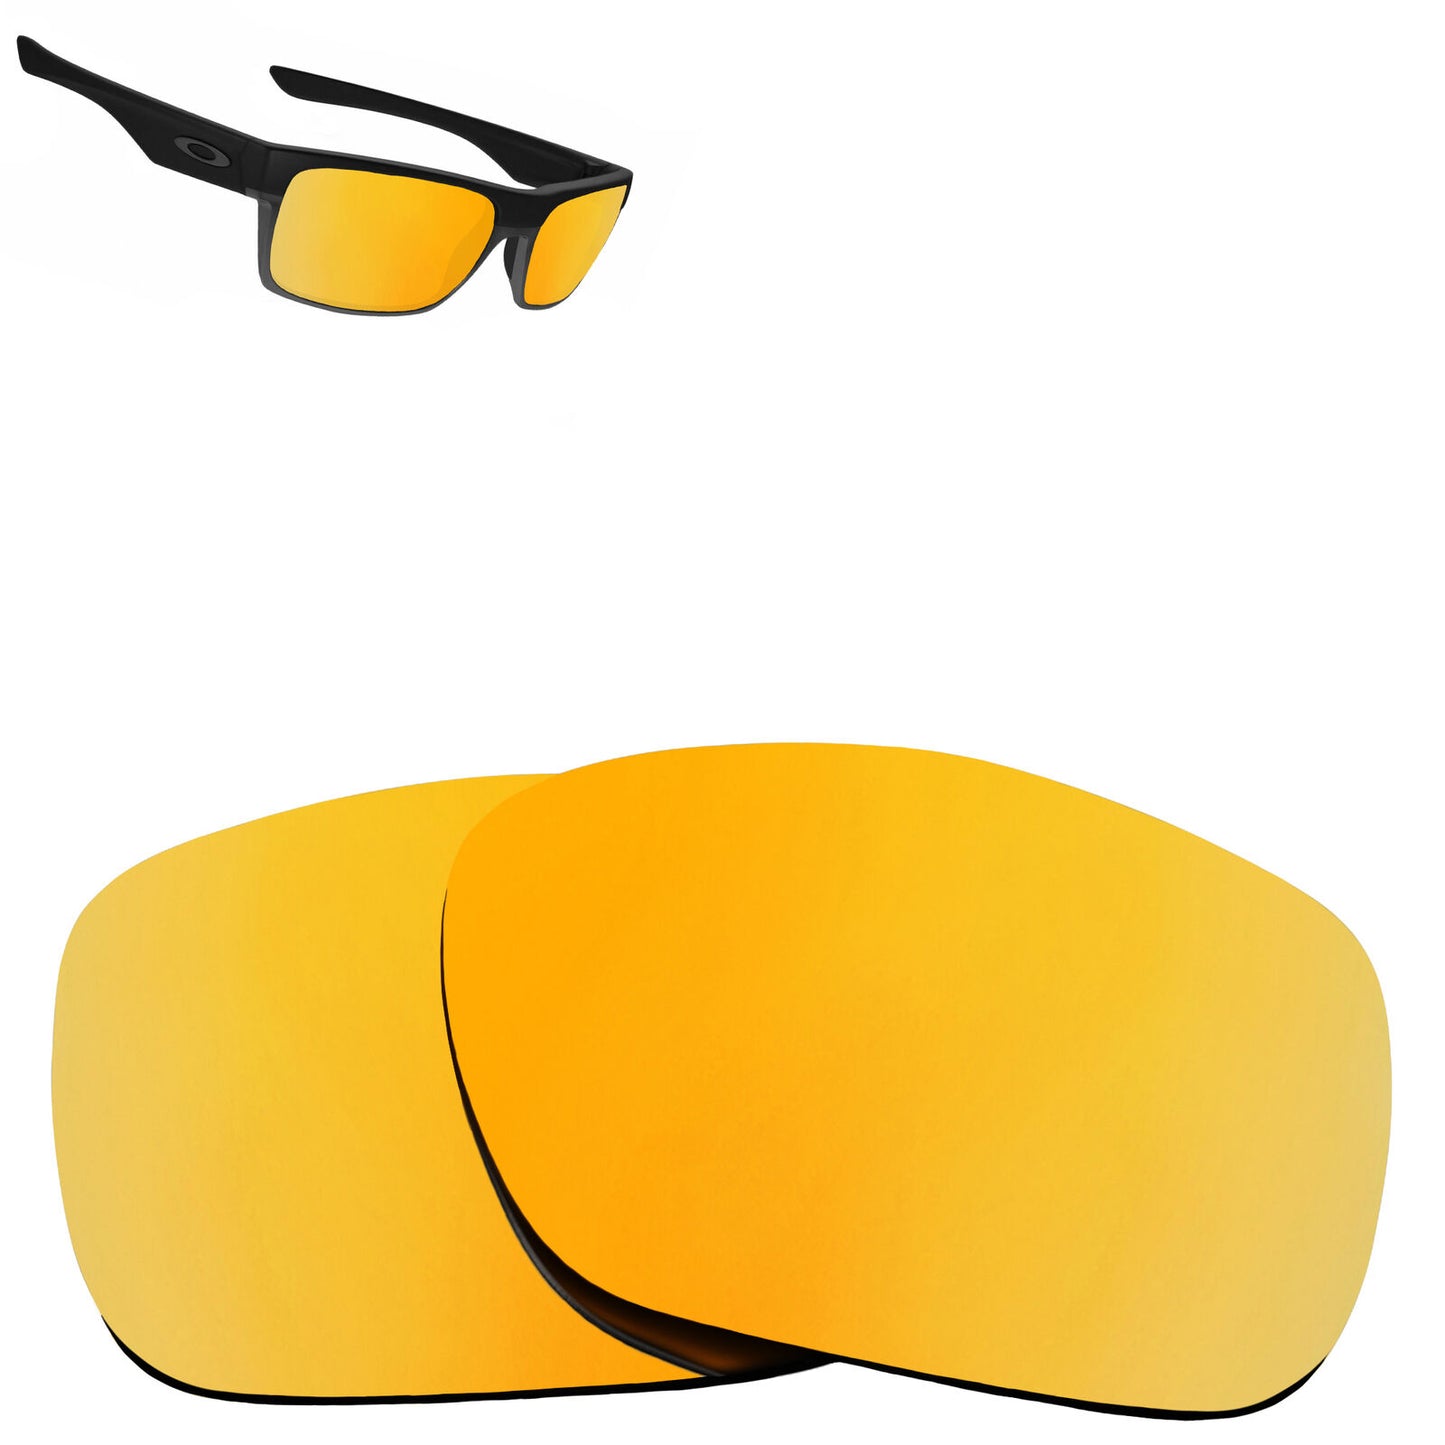 LenSwitch Replacement Lenses for Oakley Twoface Sunglasses Gold Mirror